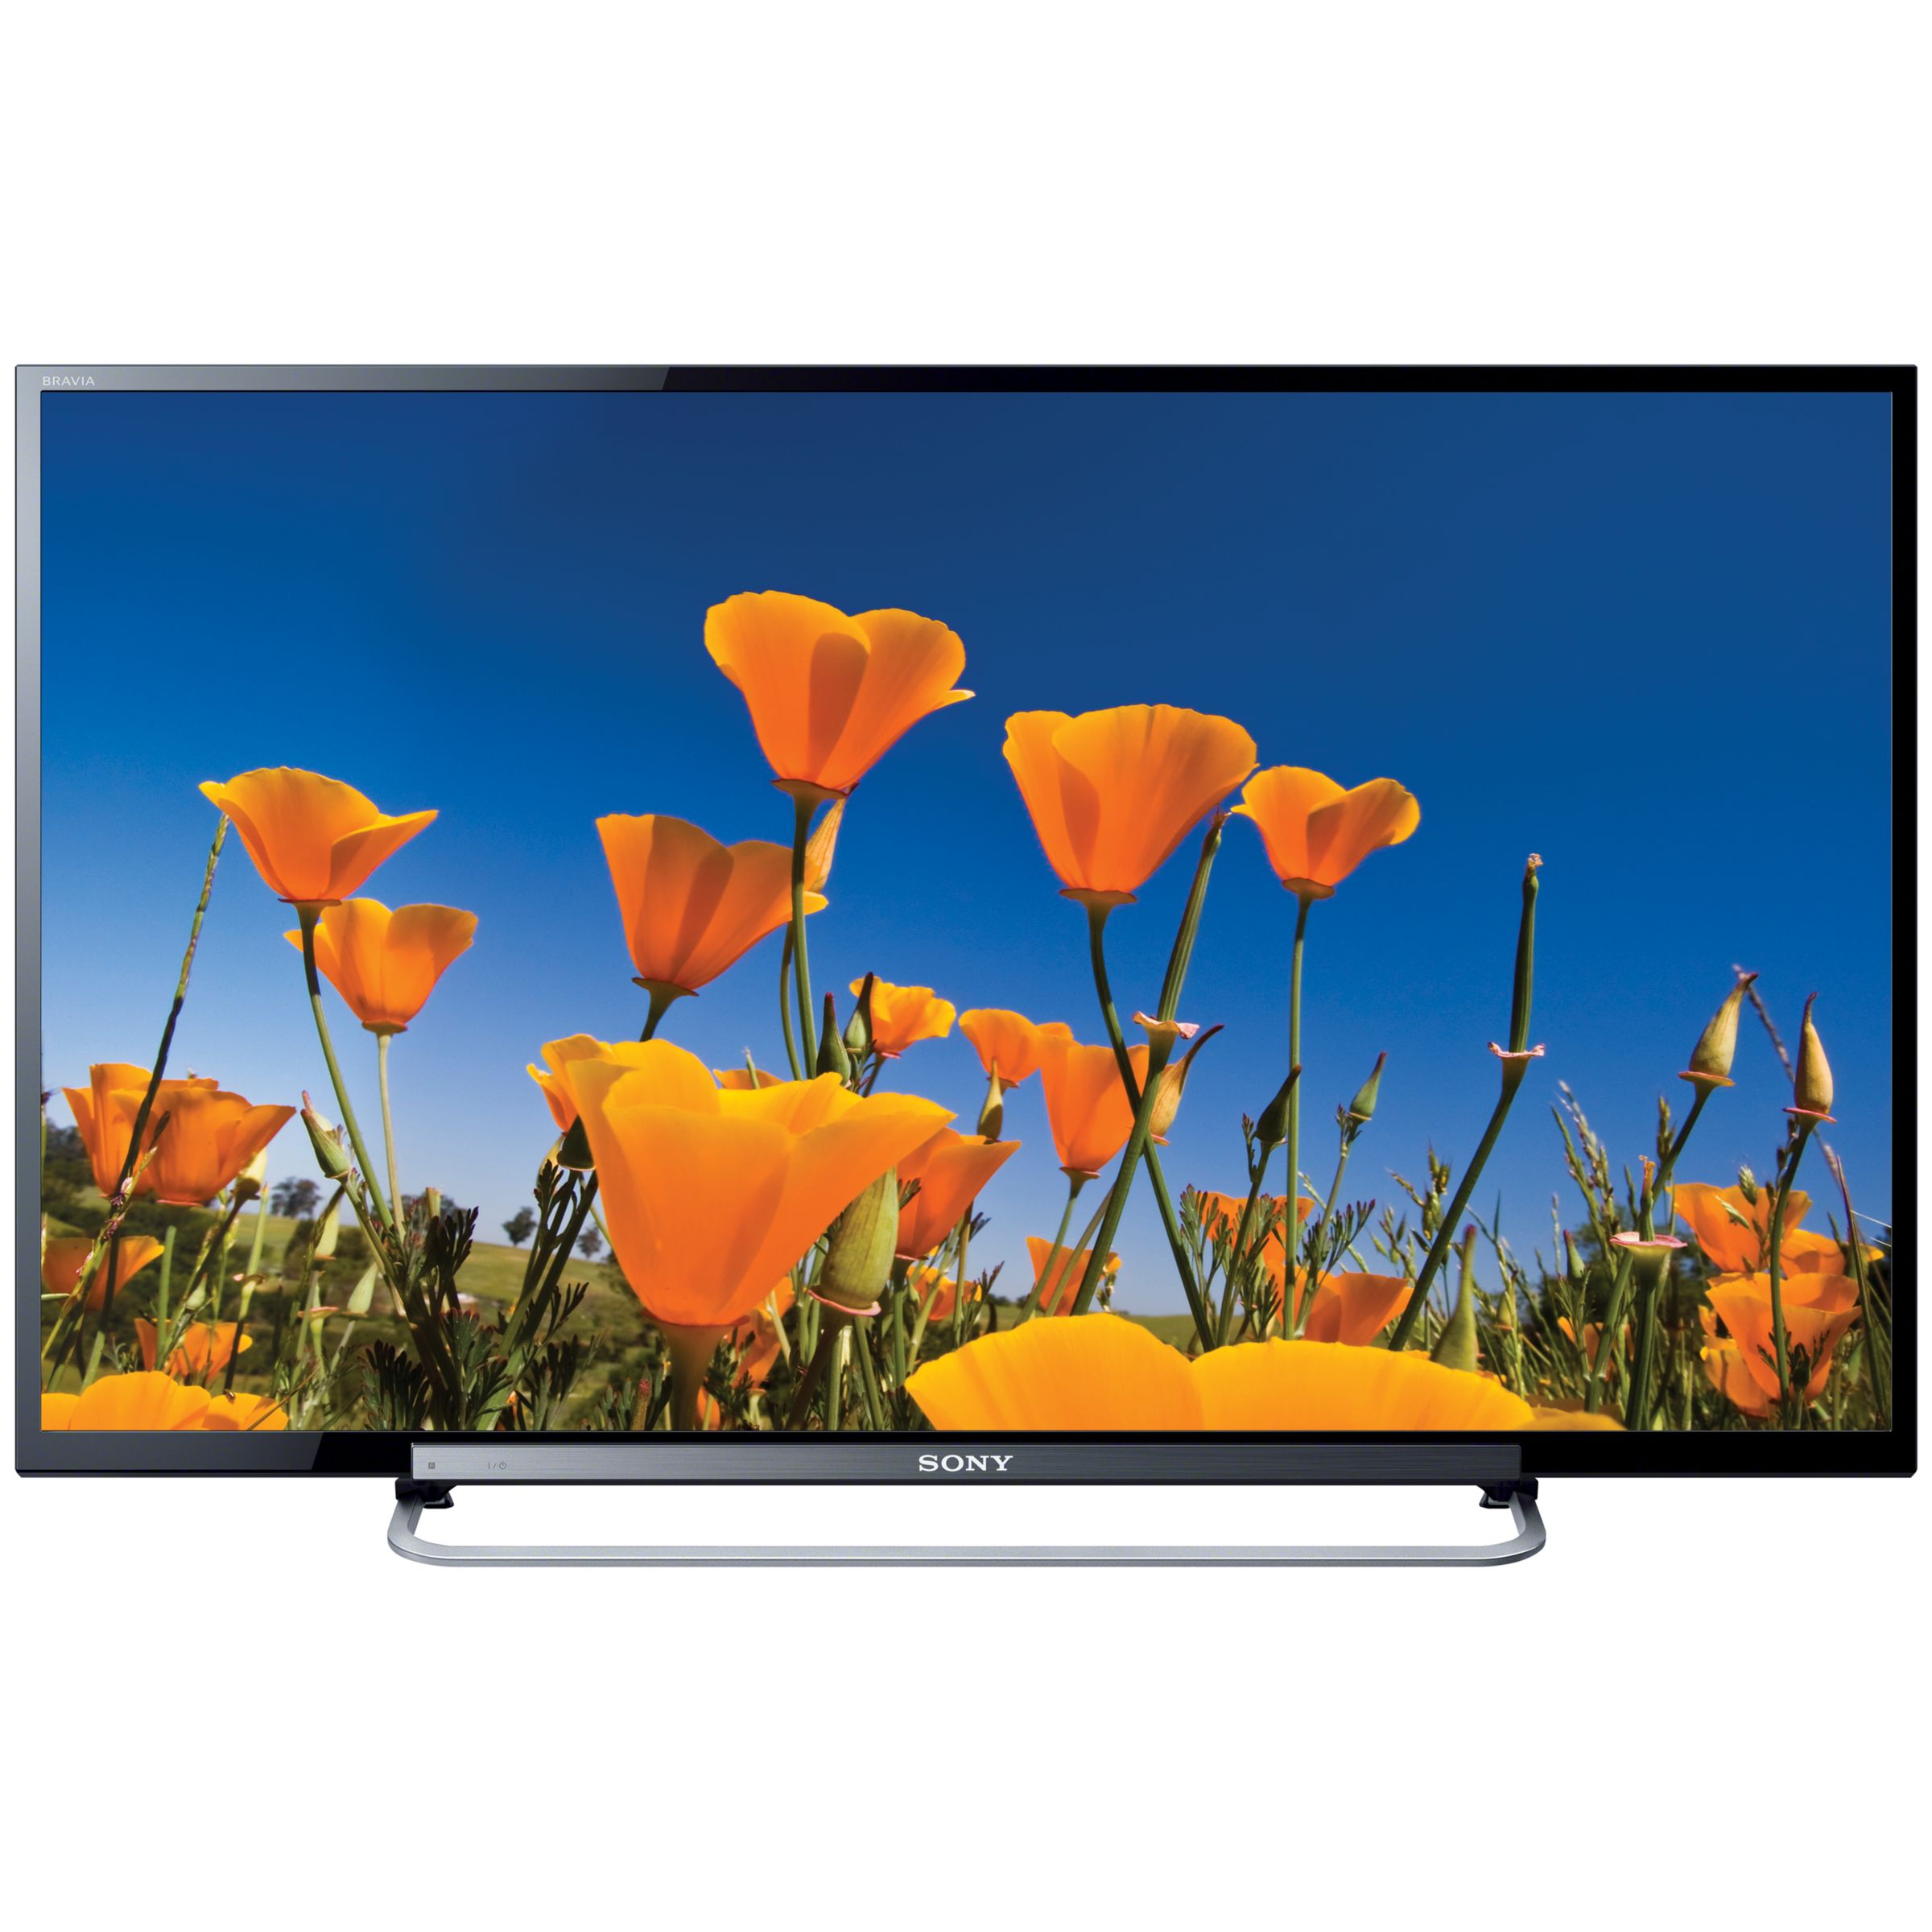 Sony Bravia KDL46R473ABU LED HD 1080p TV, 46 Inch with Freeview HD